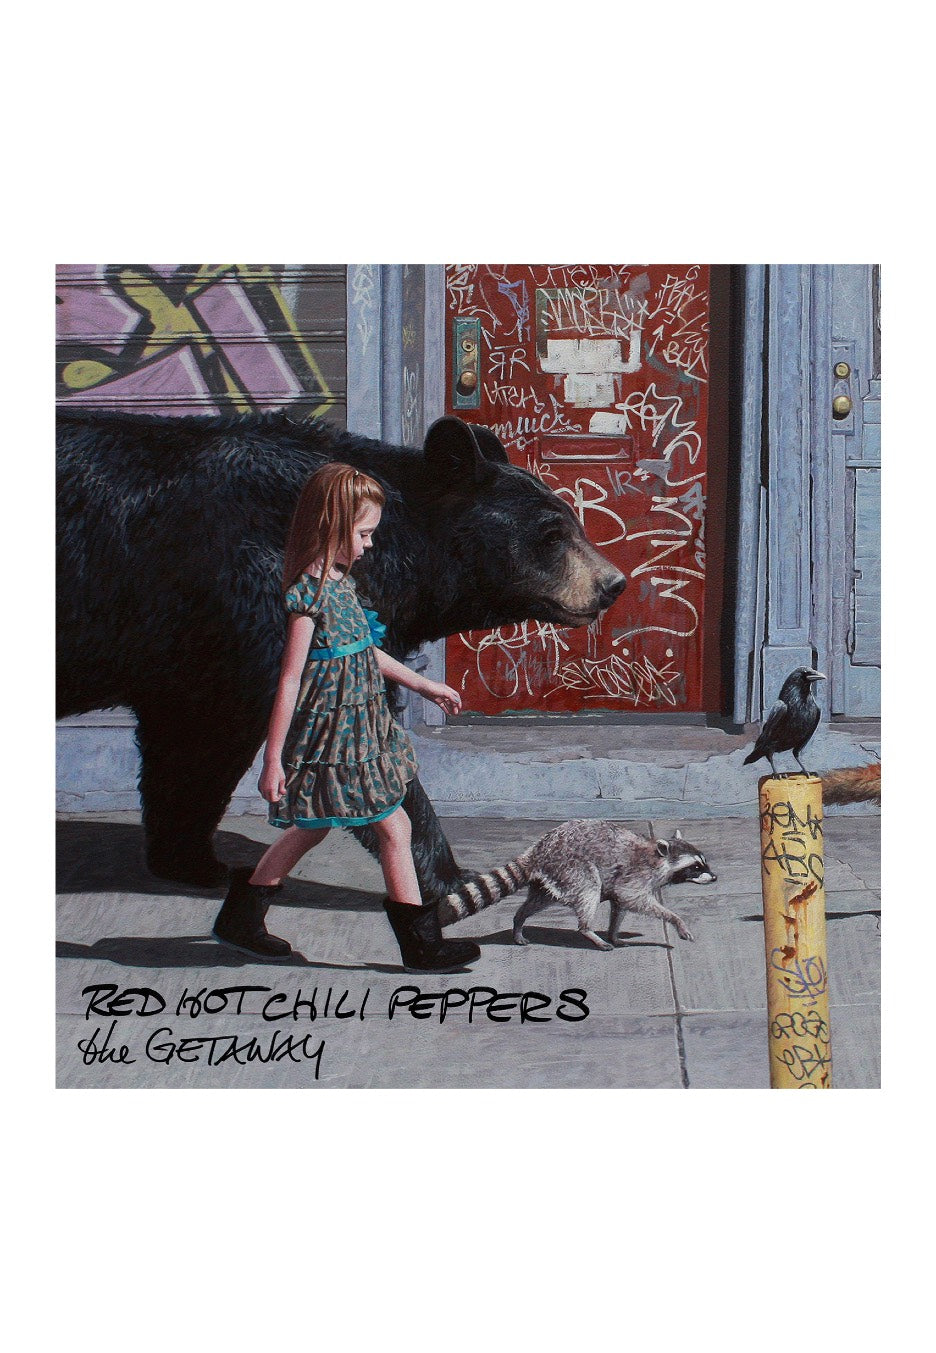 Red Hot Chili Peppers - The Getaway - CD | Neutral-Image